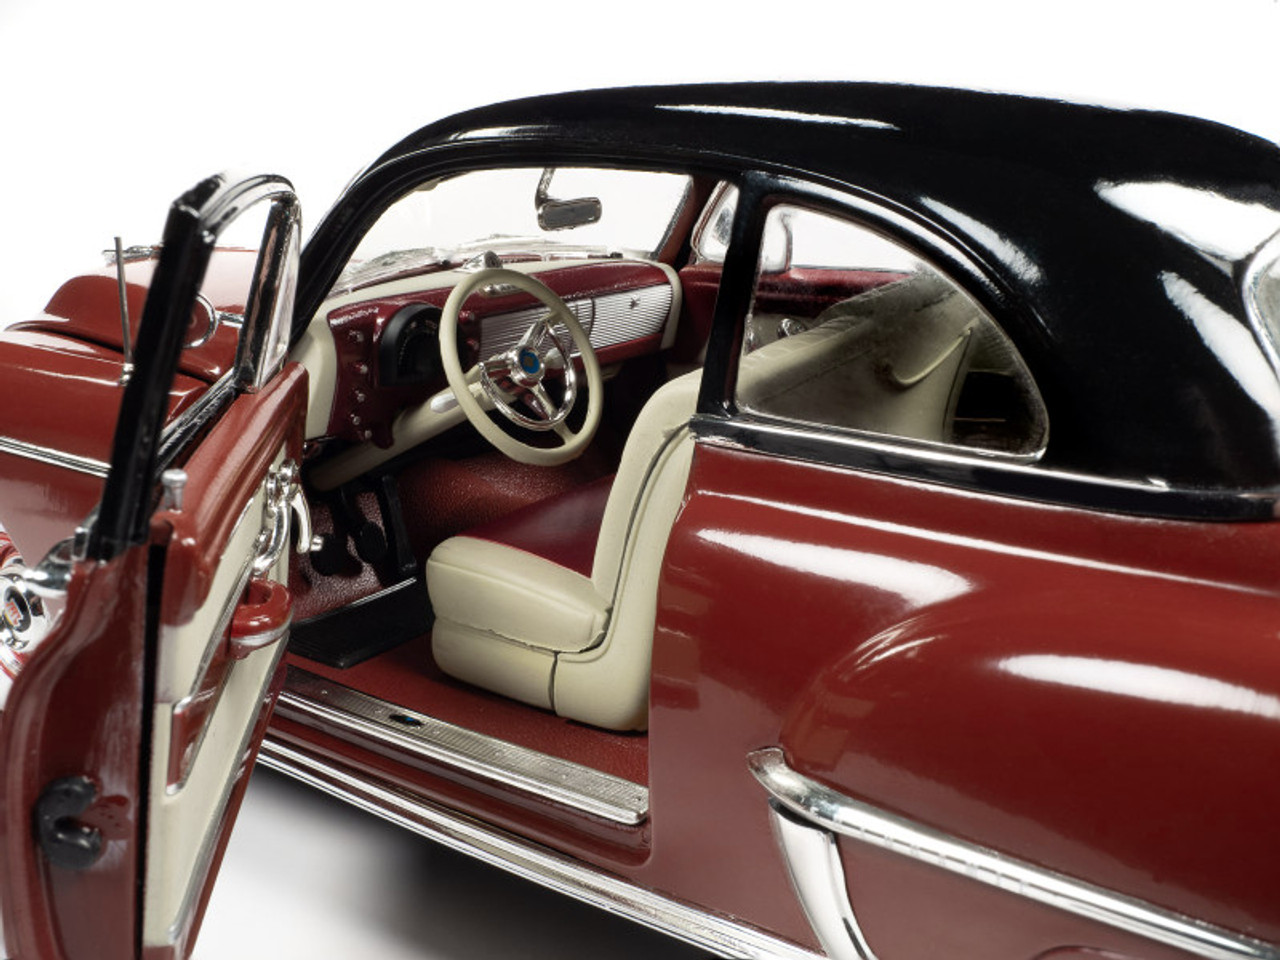 1/18 Auto World 1950 Oldsmobile Rocket 88 Chariot Red with Black Top and Red and White Interior Diecast Car Model